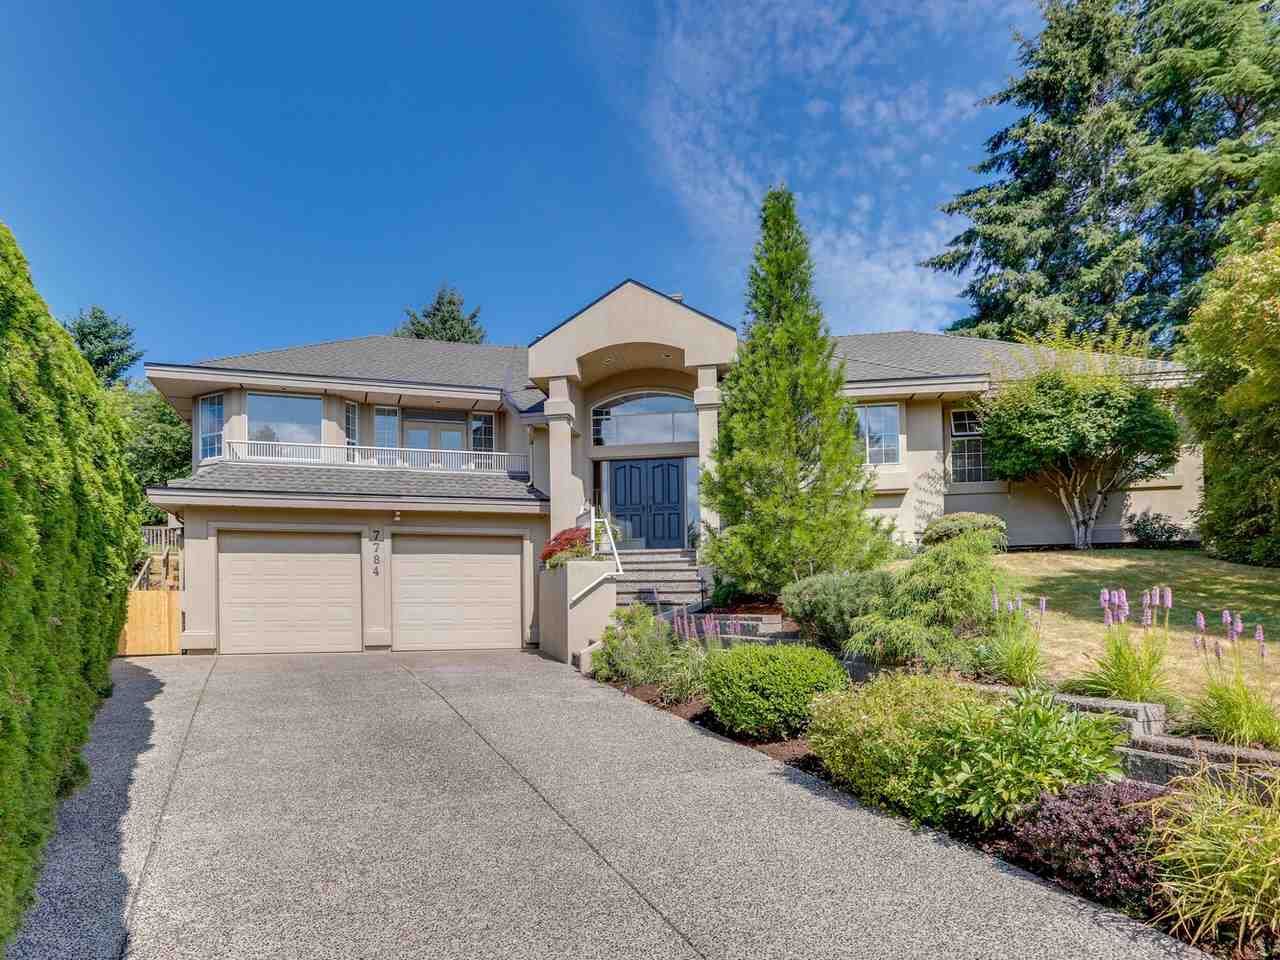 I have sold a property at 7784 163 ST in Surrey
